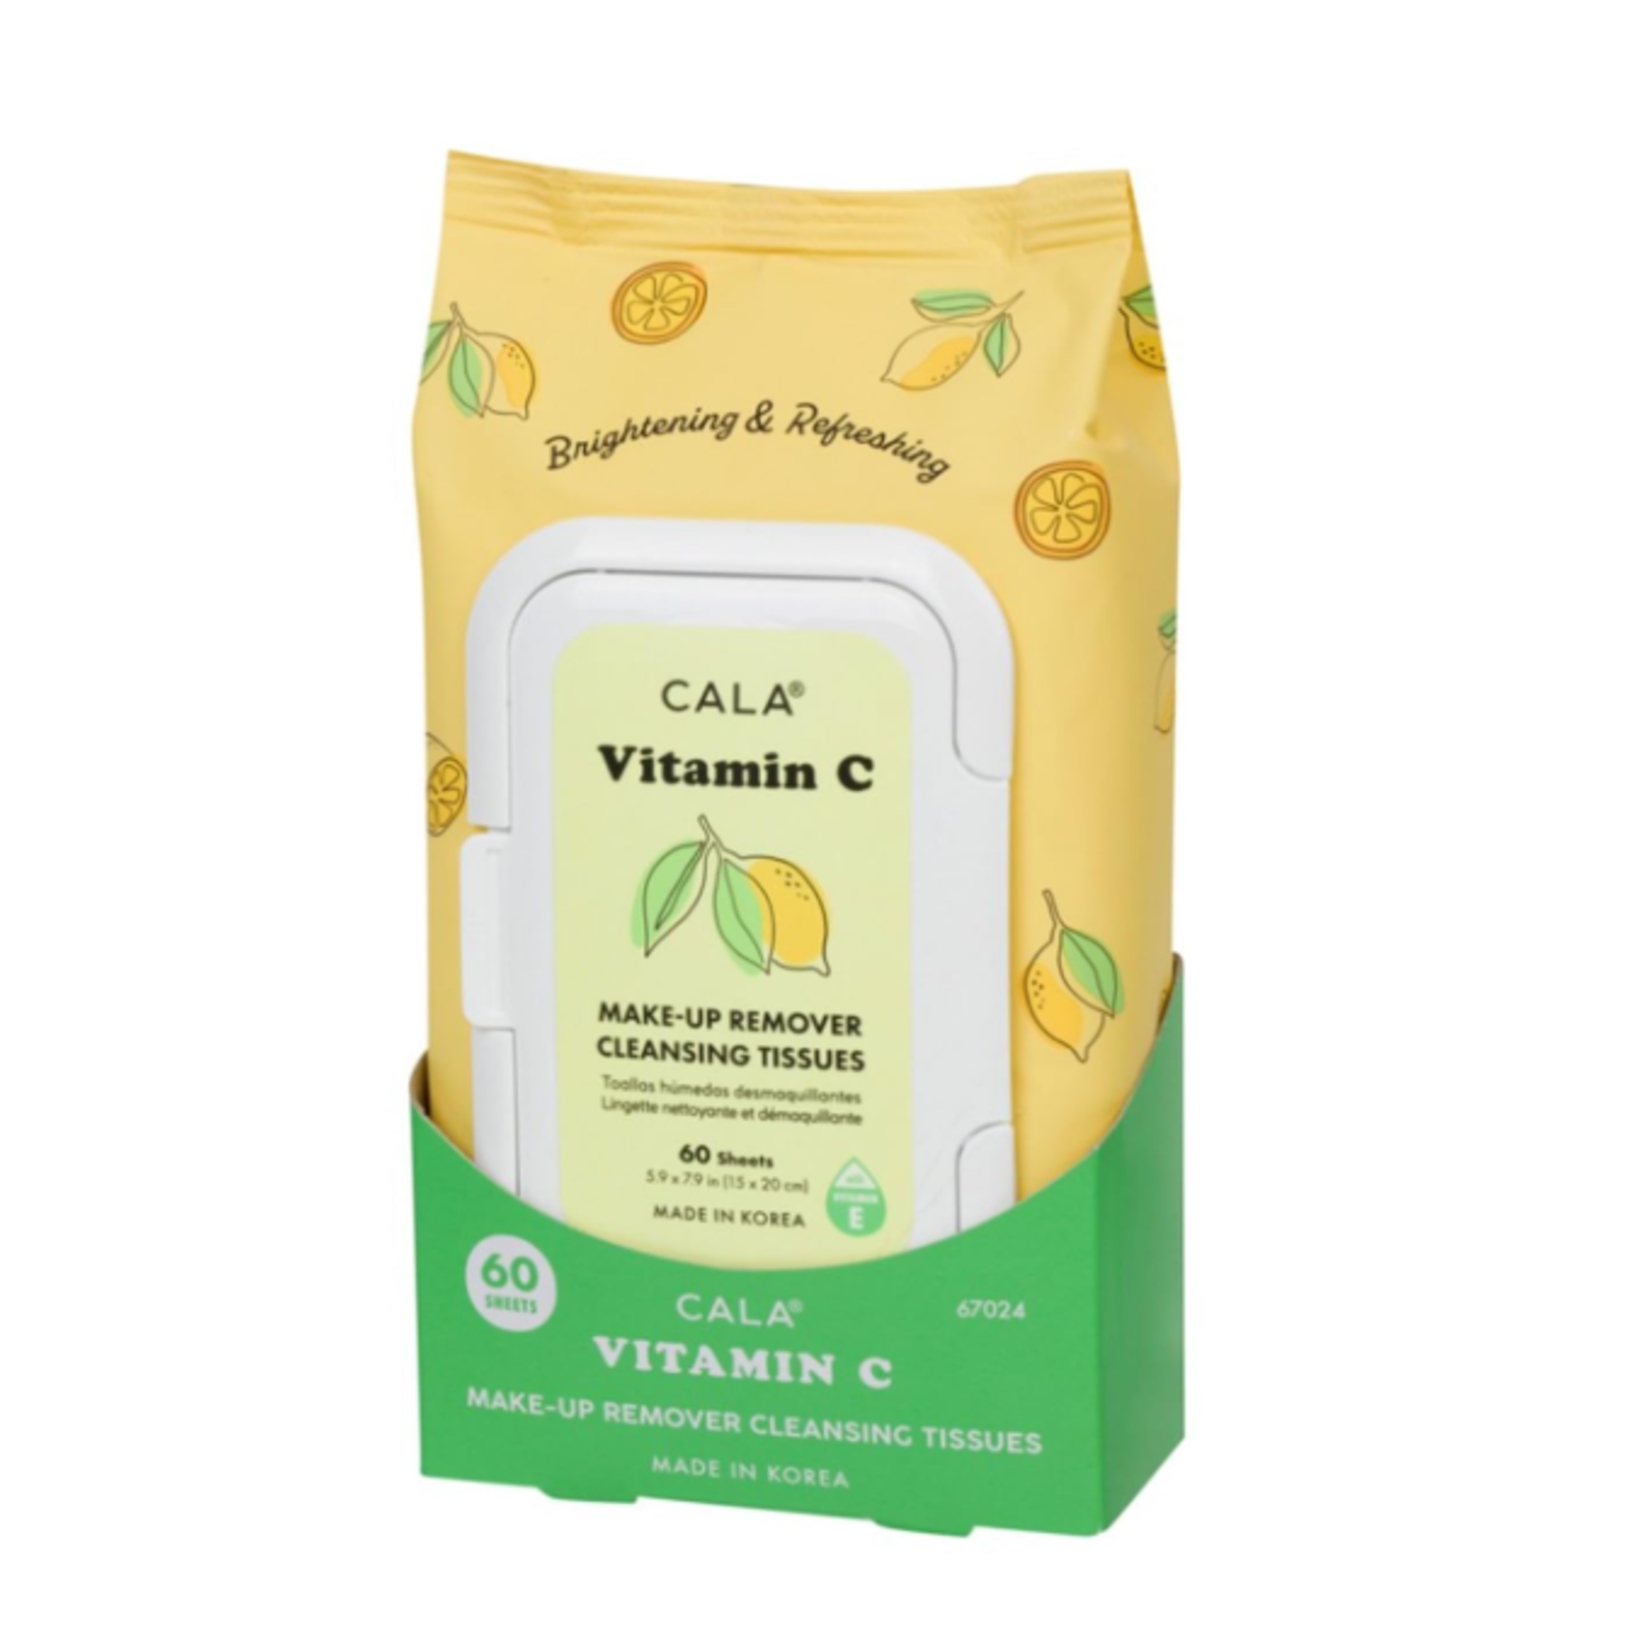 CALA Cala Vitamin c make-up remover cleansing tissues 60 count, 60 Count